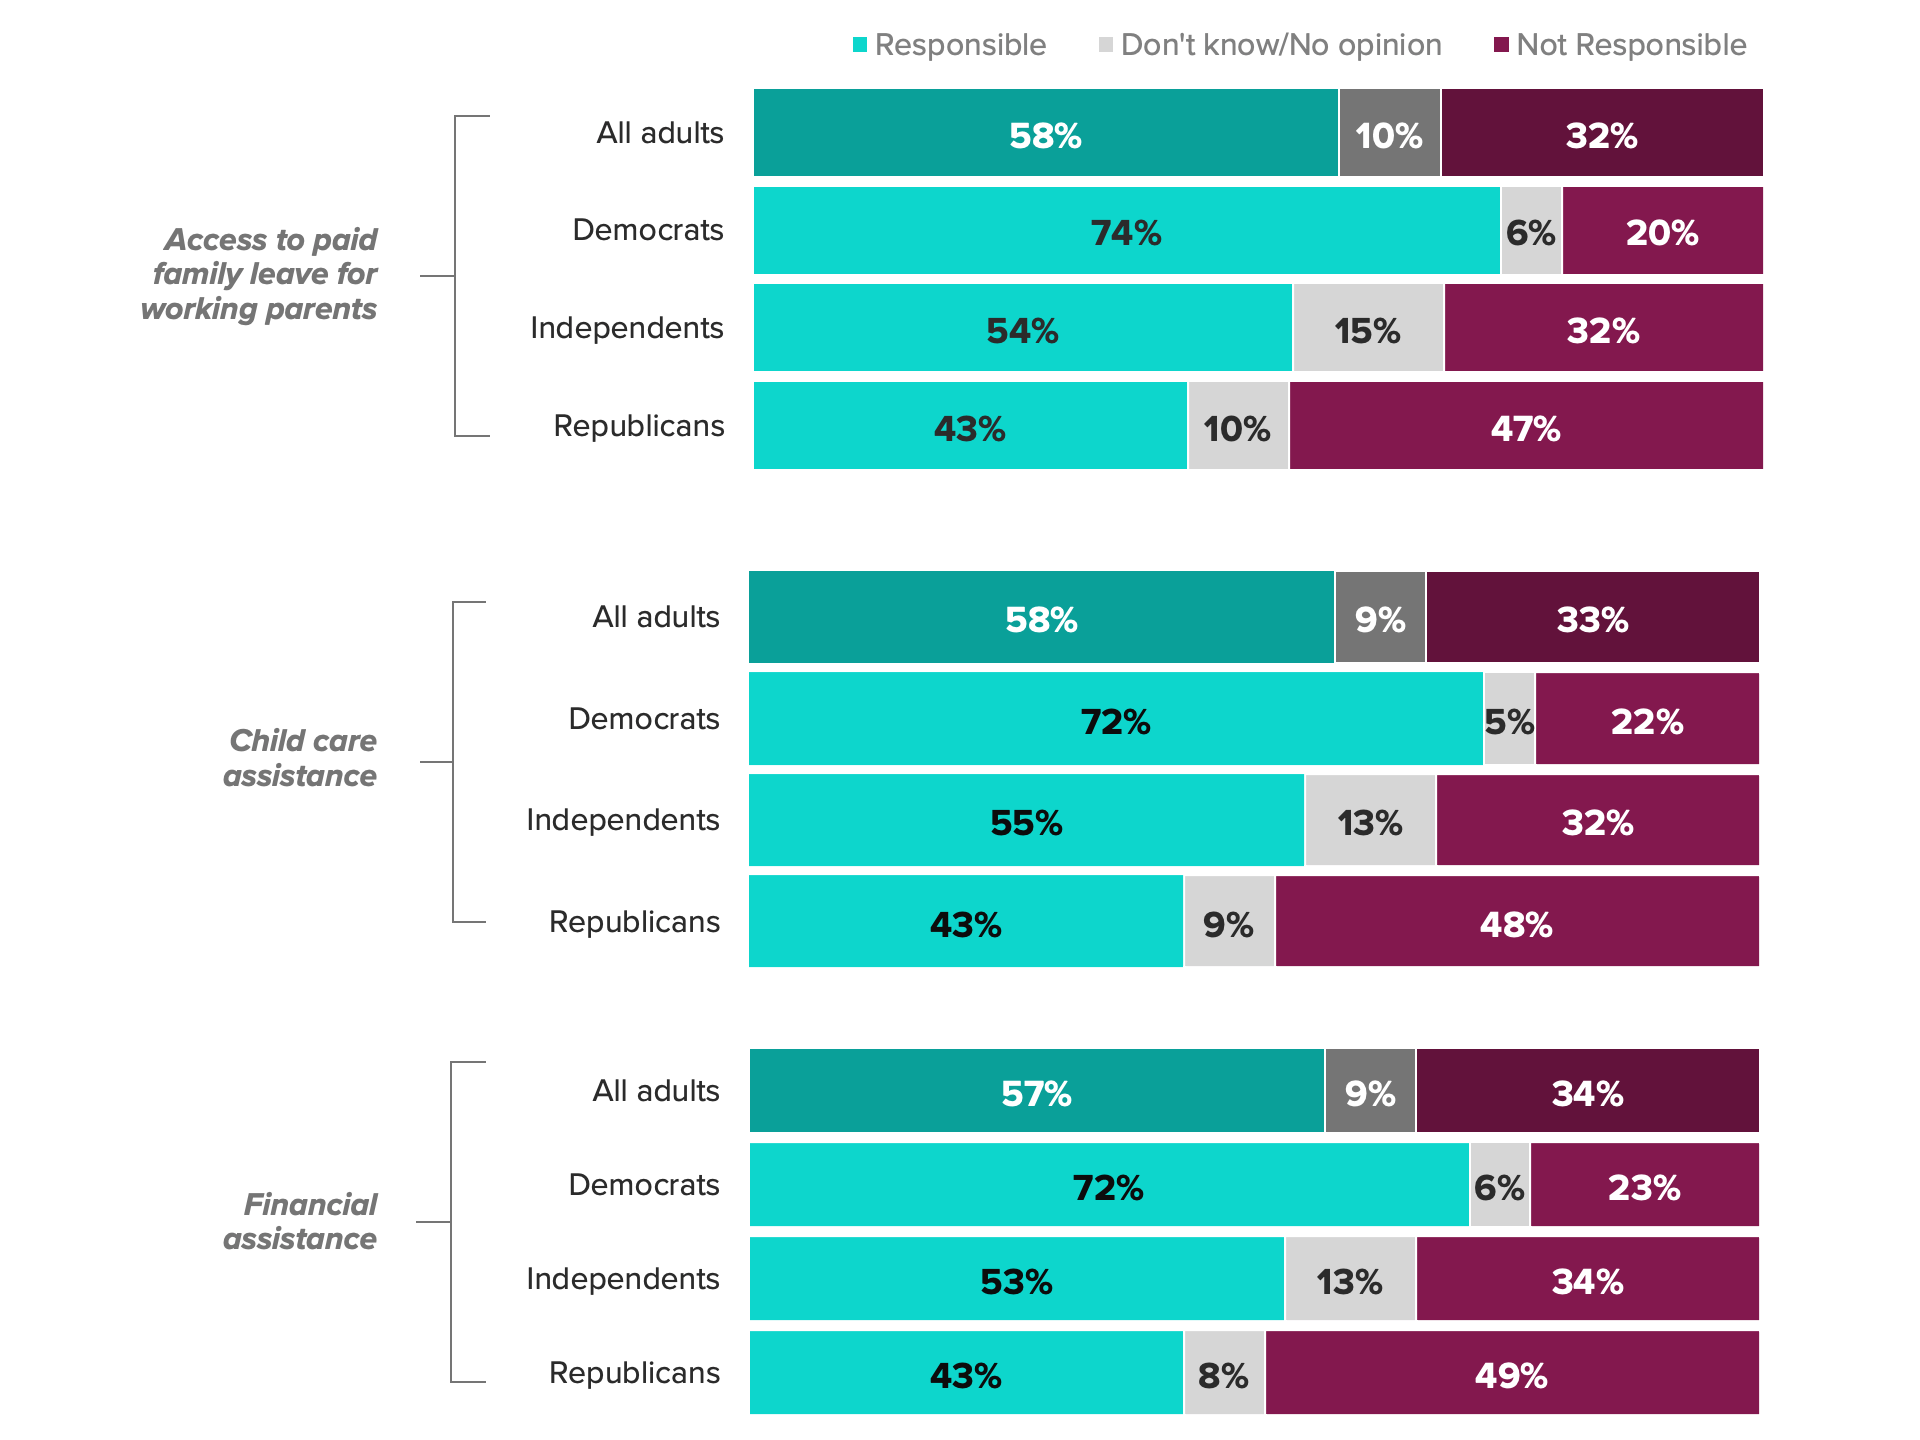 Stacked horizontal bar chart of survey data on whether Americans think the government is responsible for financial assistance measures for families. The chart shows a majority support for access to paid family leave, child care assistance and general financial assistance.